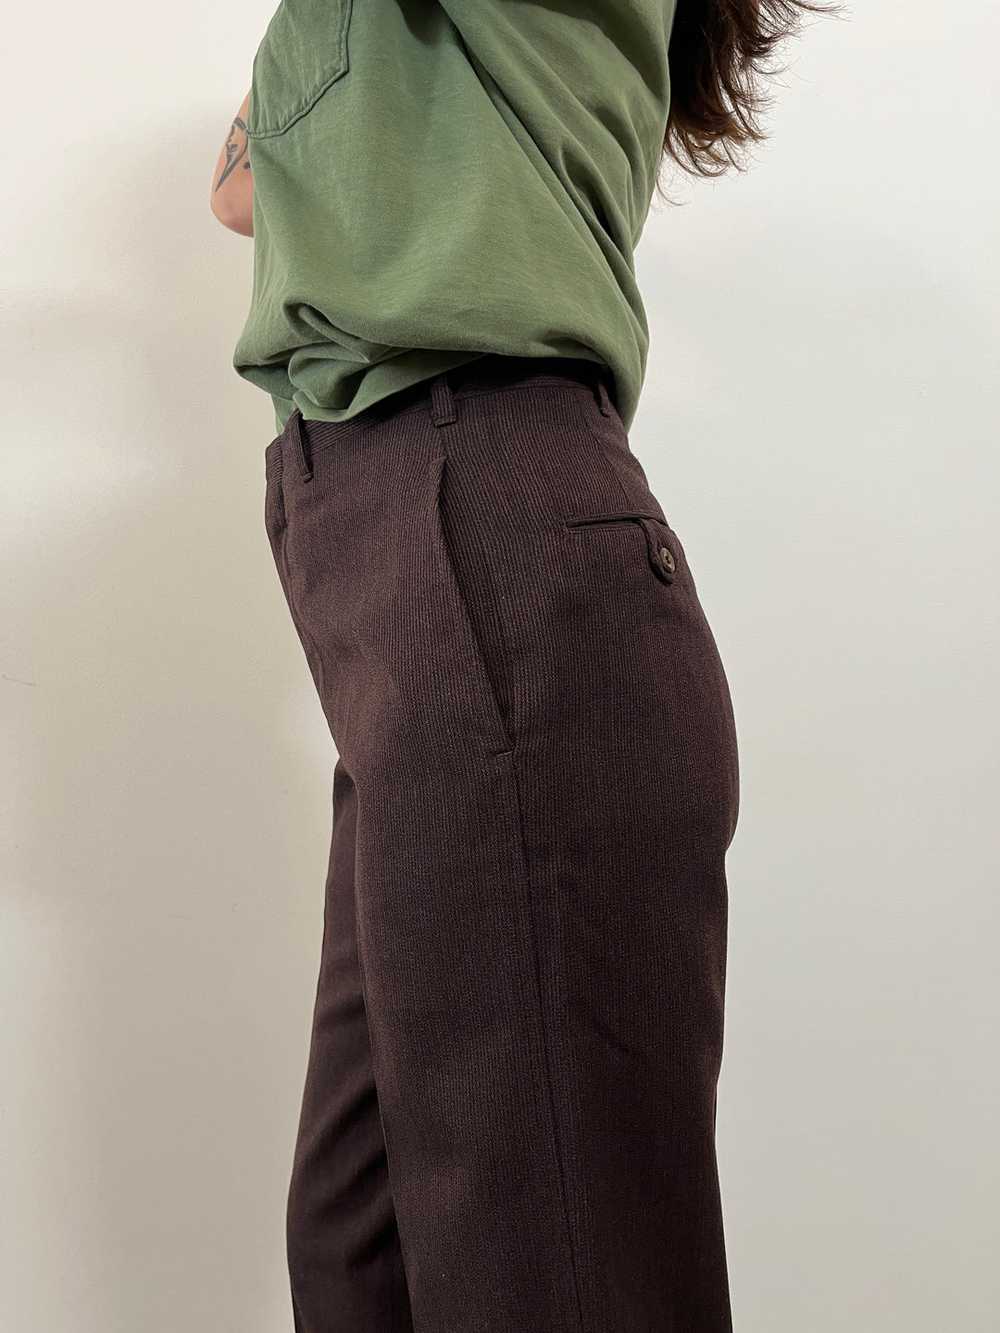 50s/60s Brown Twill Work Pants - image 3